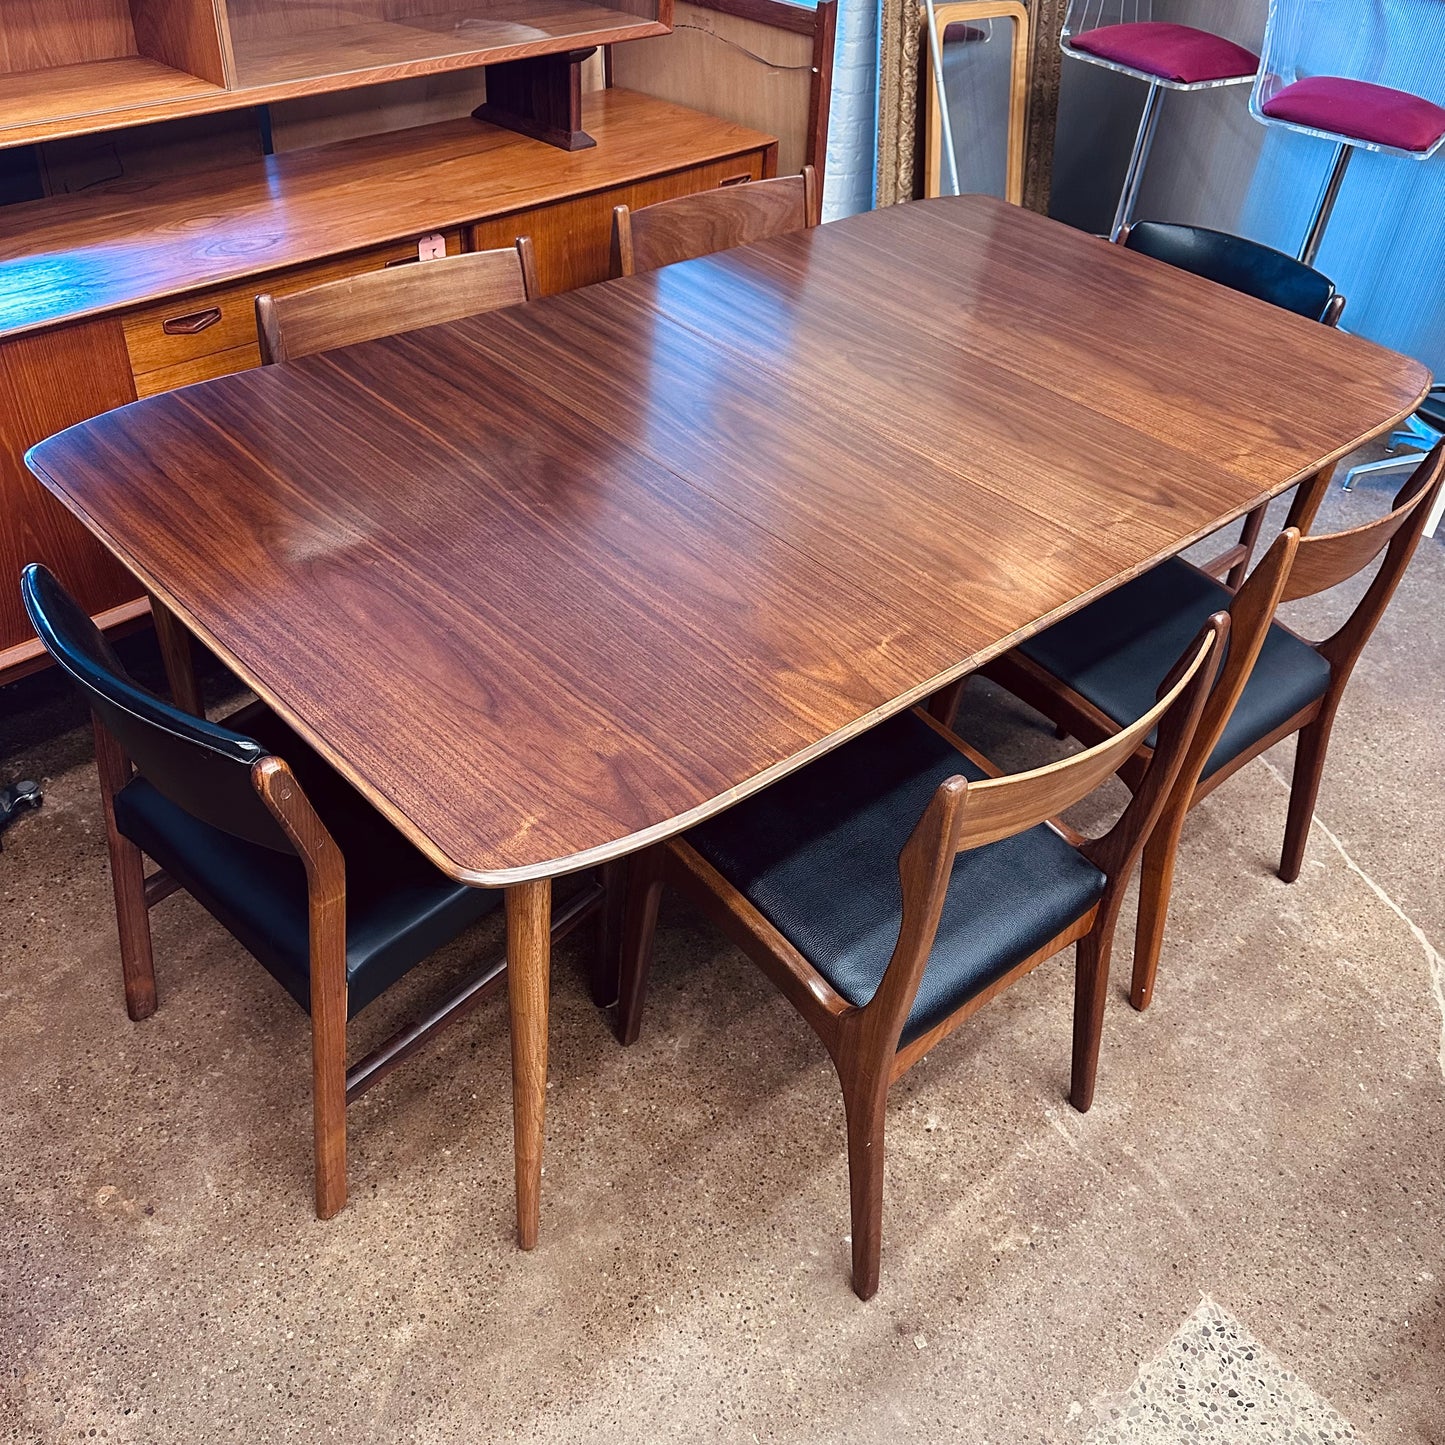 72” WALNUT DINING TABLE WITH TWO LEAVES - REFINISHED